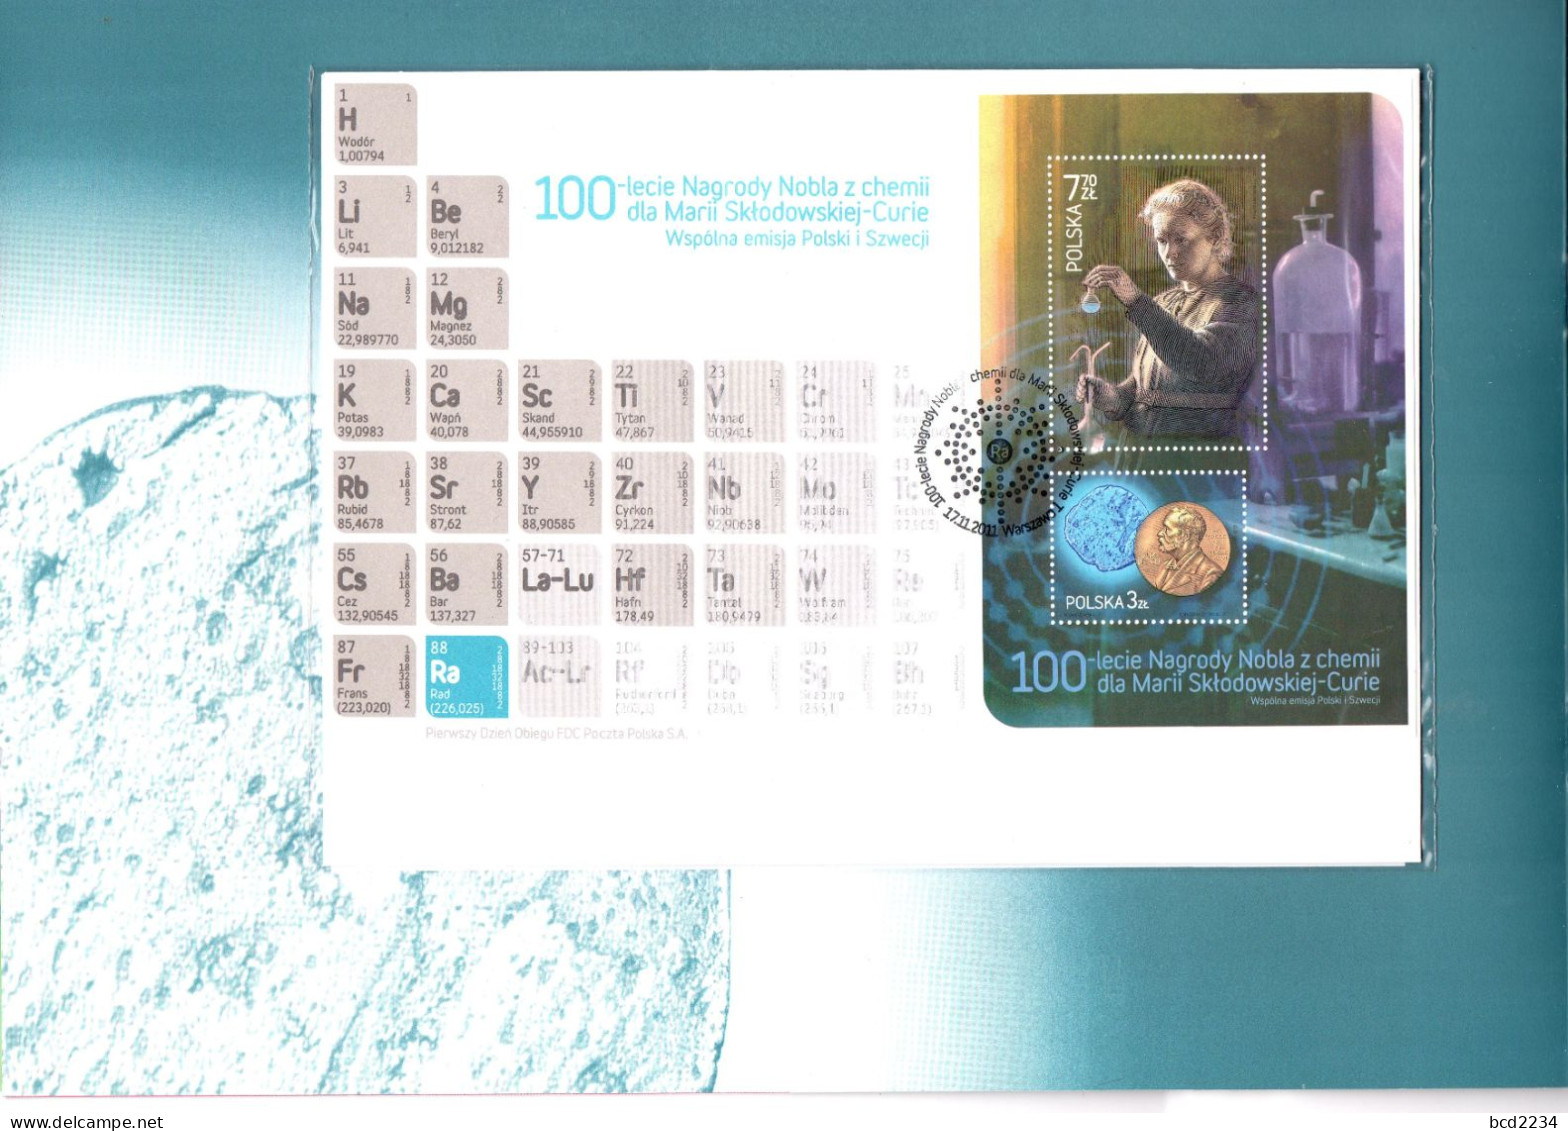 POLAND 2011 LIMITED EDITION: RARE 100TH ANNIVERSARY MARIE CURIE NOBEL PRIZE CHEMISTRY FOLDER FDC MS PL SWEDEN - Chimie